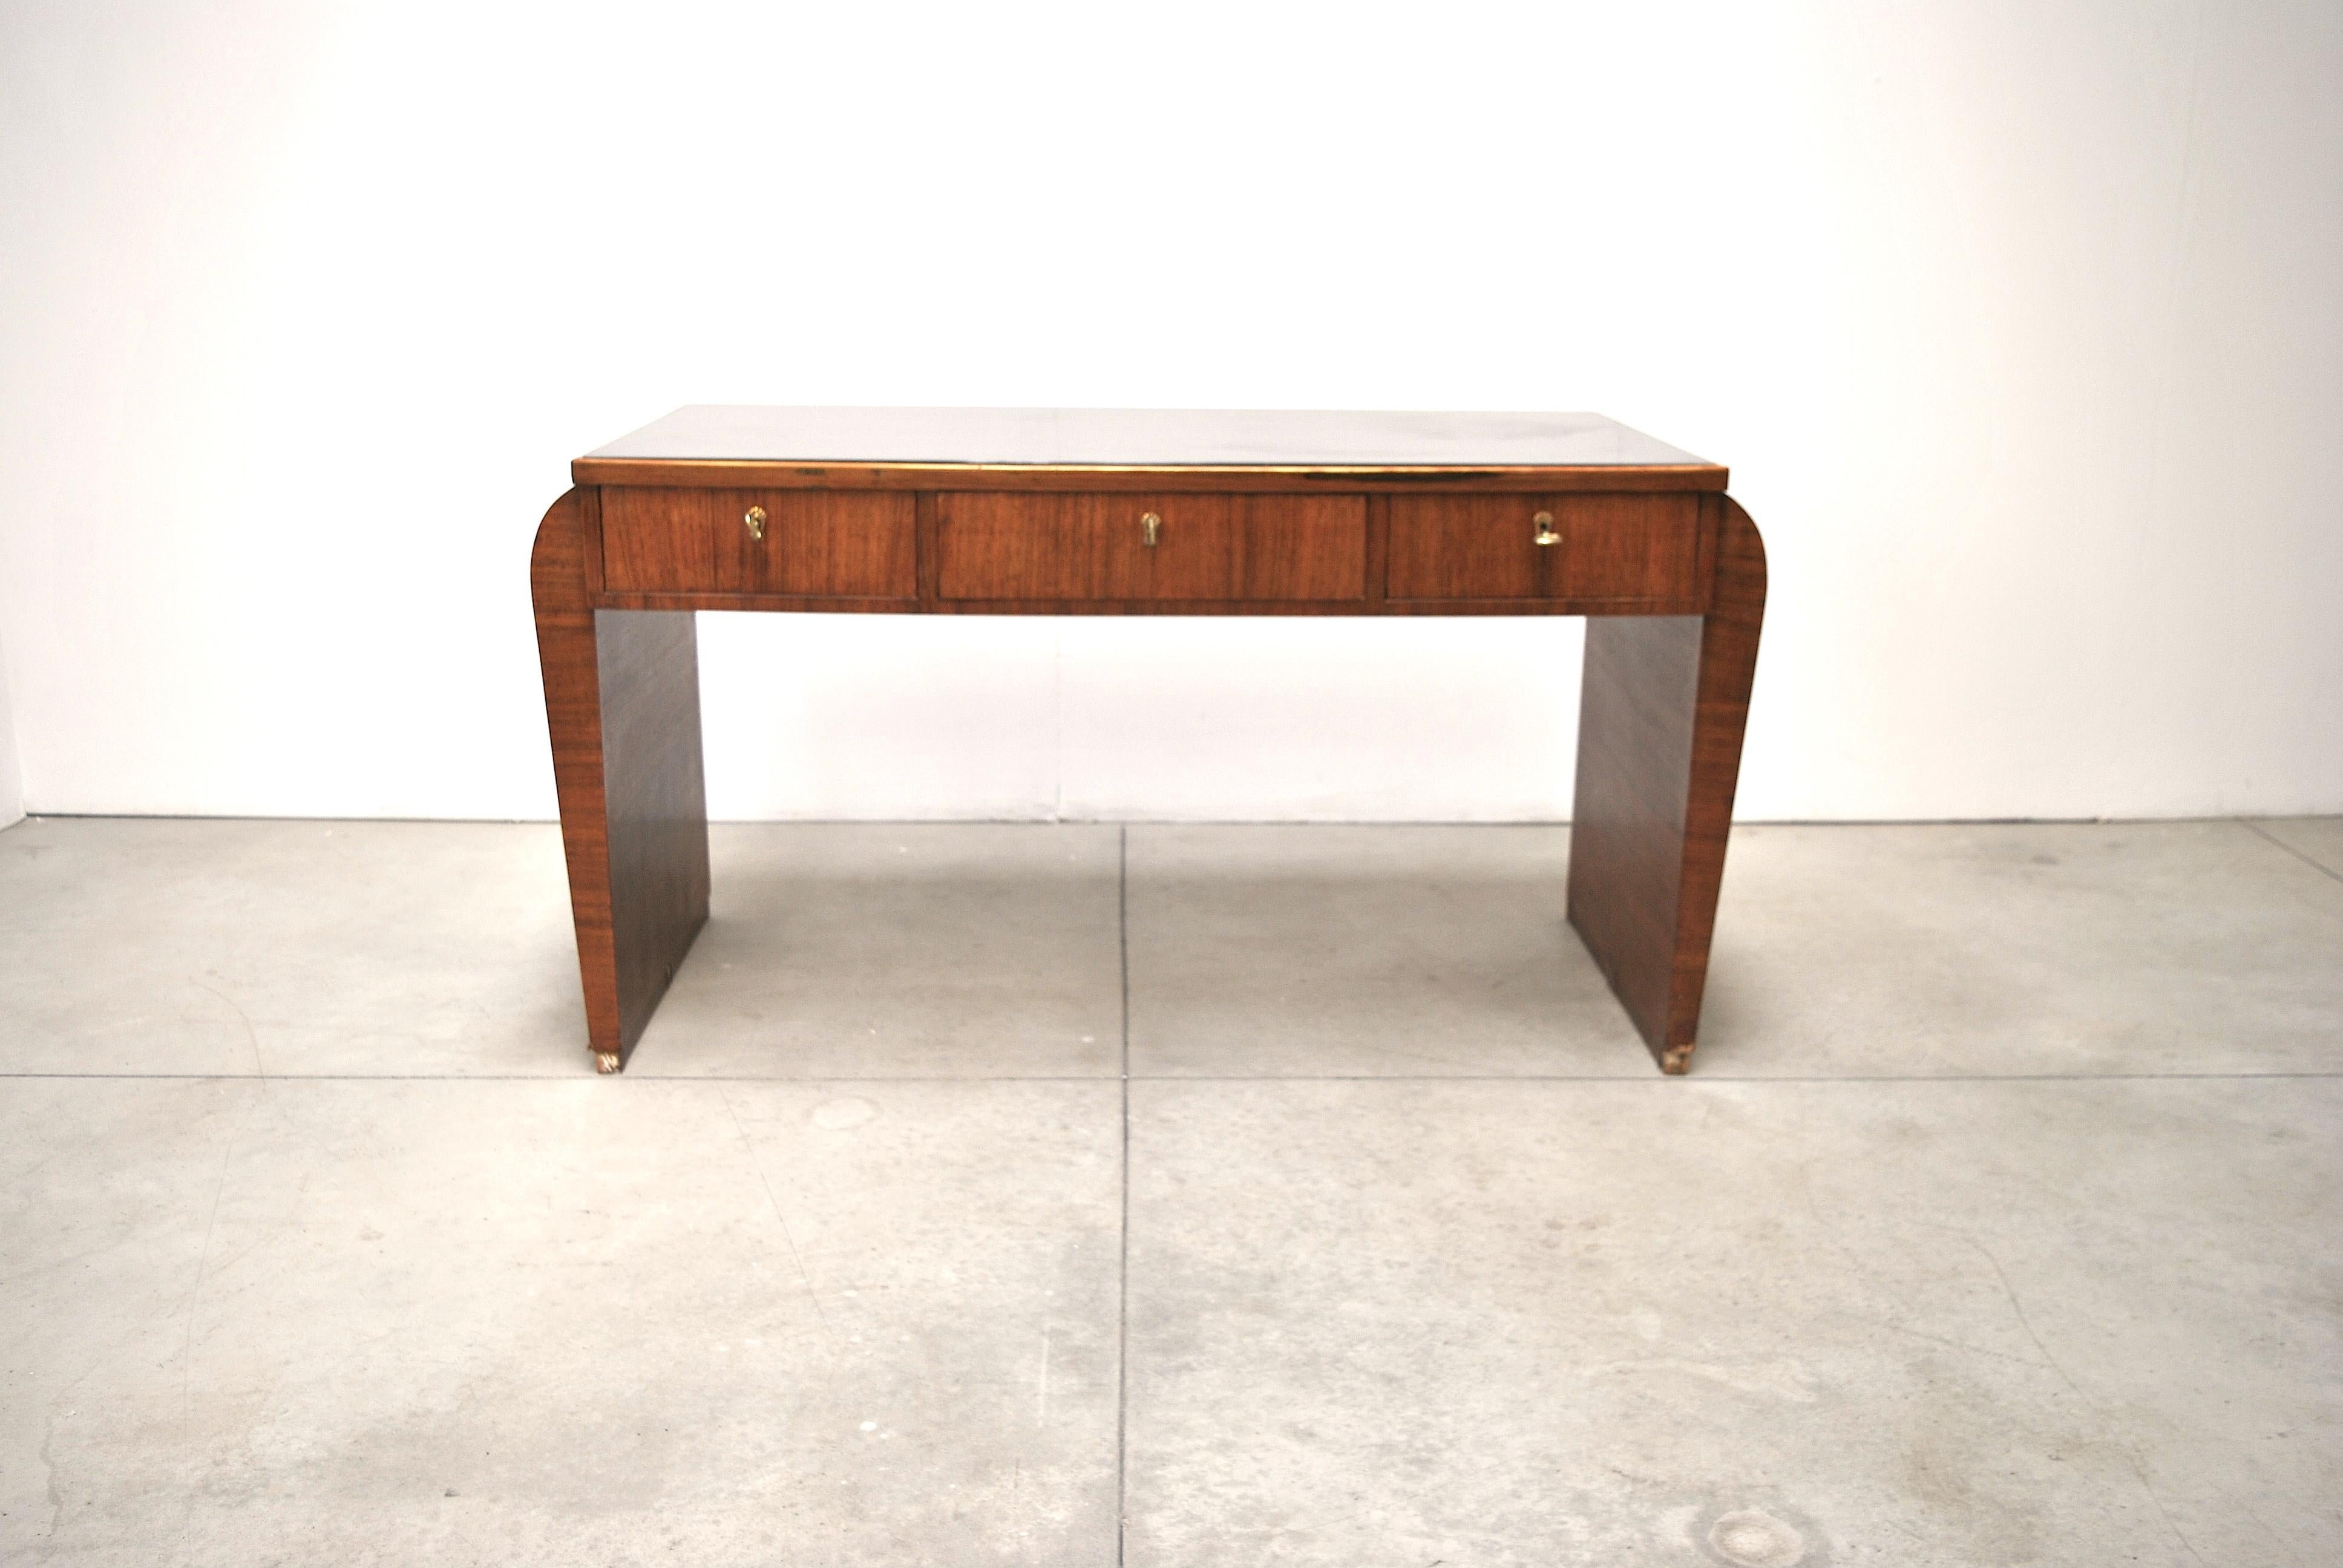 Midcentury rationalist writing table made in Italy with brass finishes at the end of 1930s.